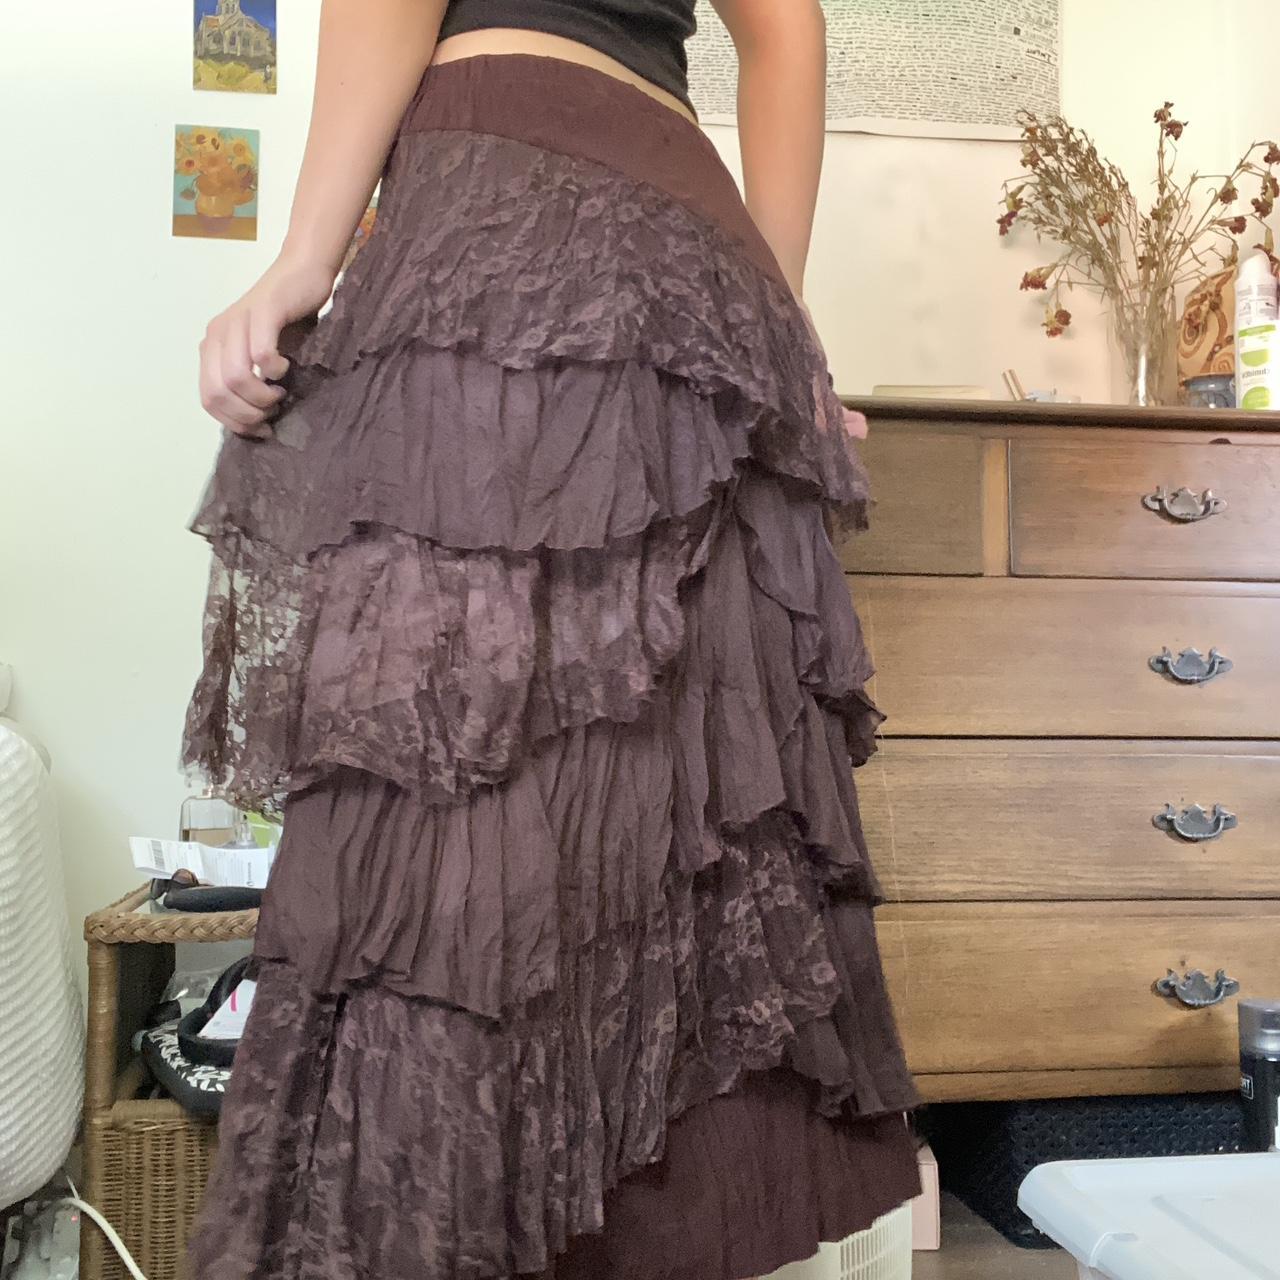 Amazing brown layered/tiered maxi skirt 🧡 Has a... - Depop